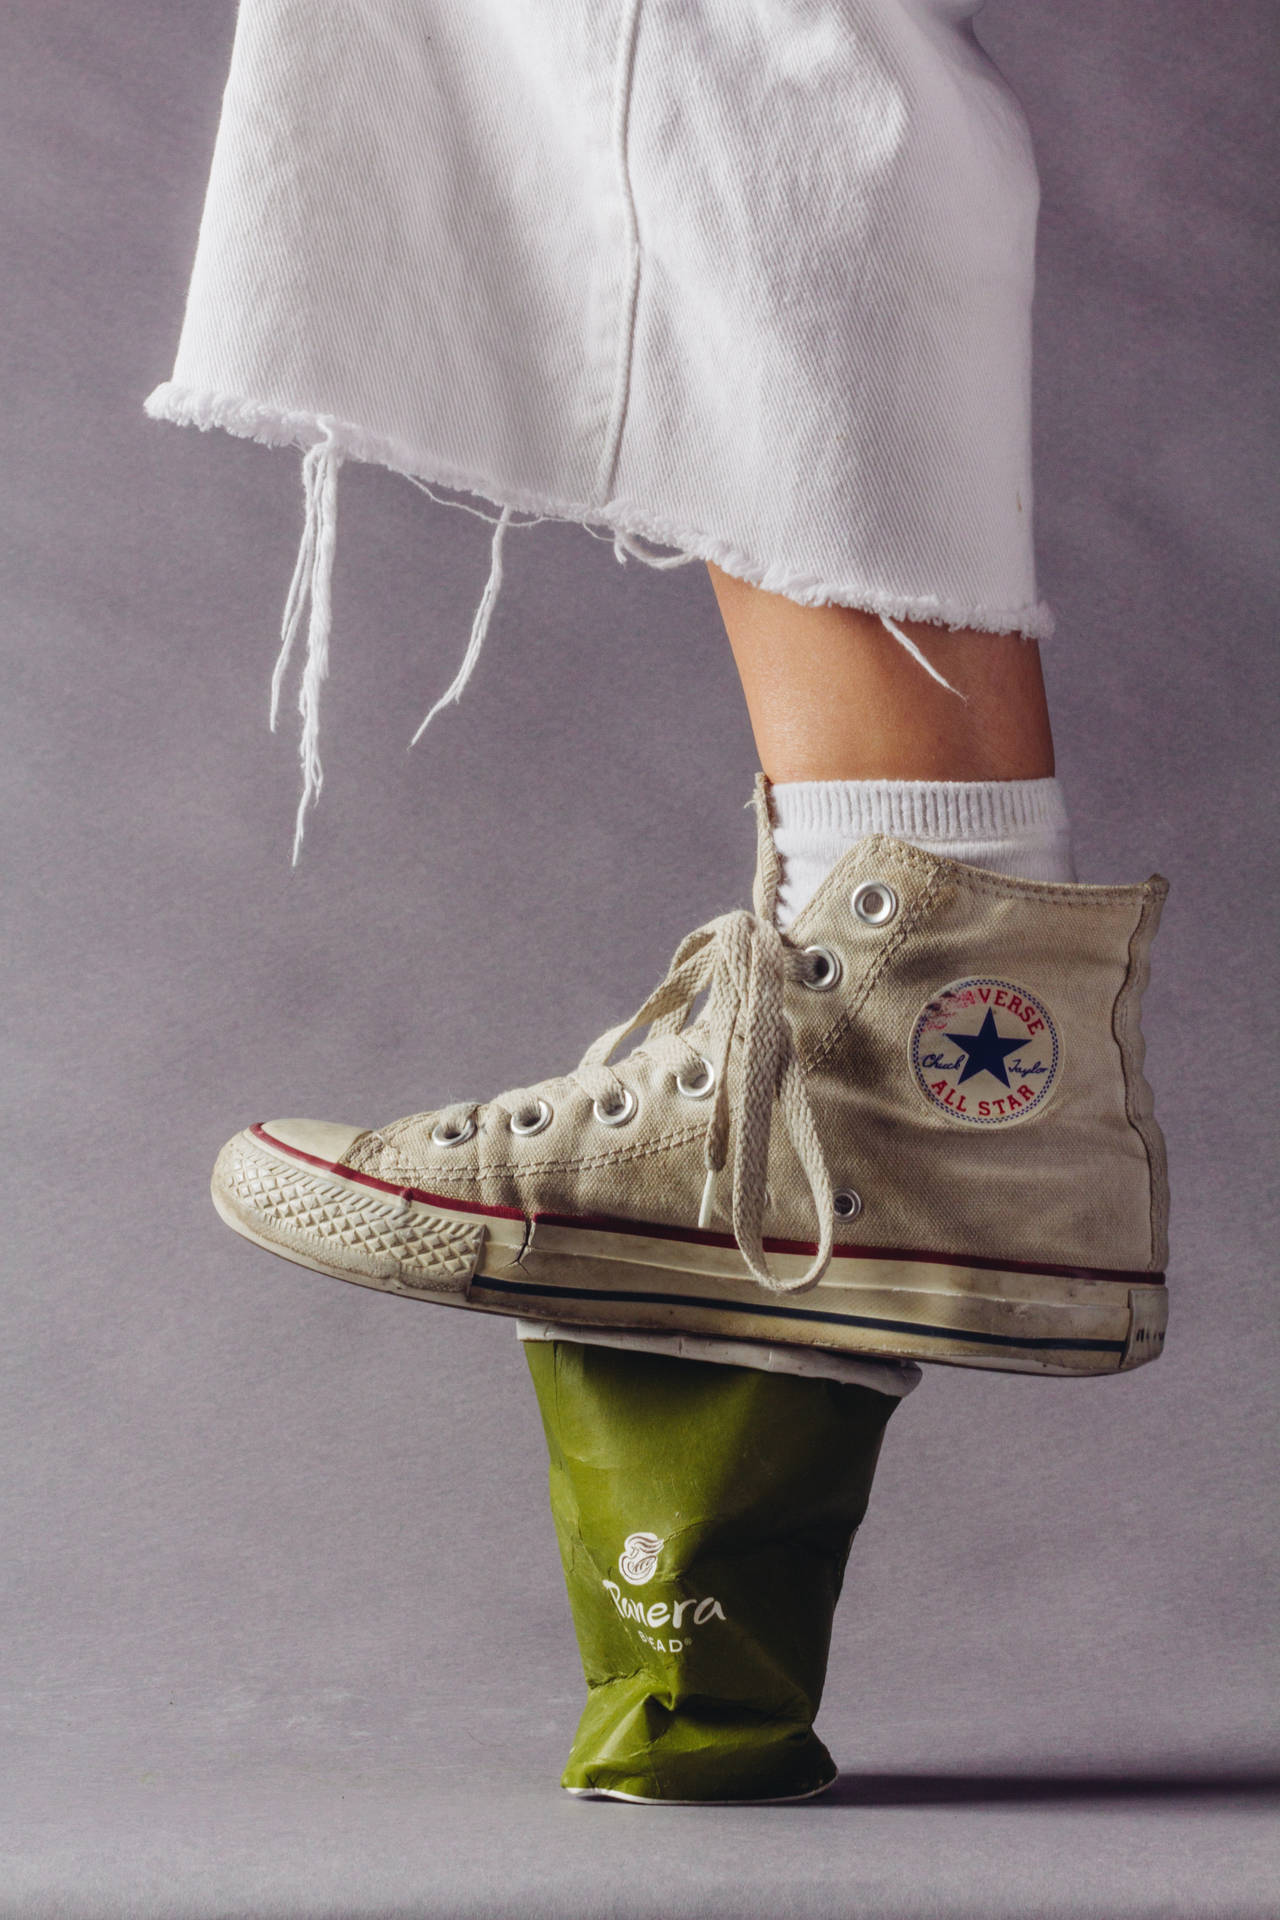 A model wearing white converse sneakers with a green cone on the heel - Converse